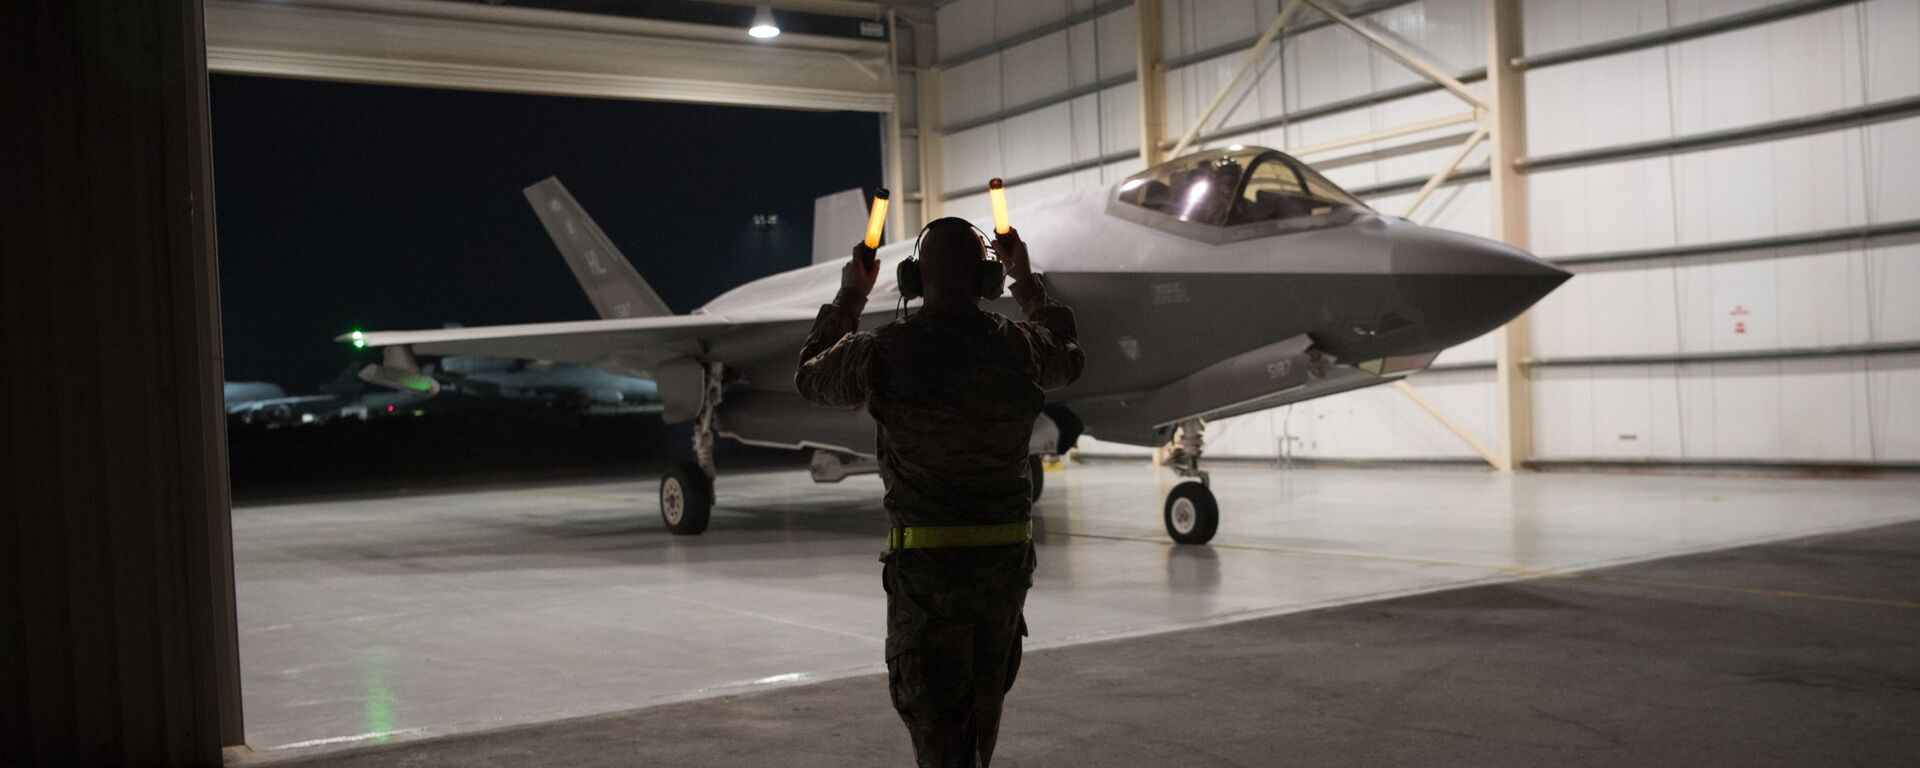 In this Sept. 10, 2019, photo released by the U.S. Air Force, an F-35A Lightning II fighter jet is directed out of a hangar at Al-Dhafra Air Base in the United Arab Emirates. - Sputnik International, 1920, 05.11.2021